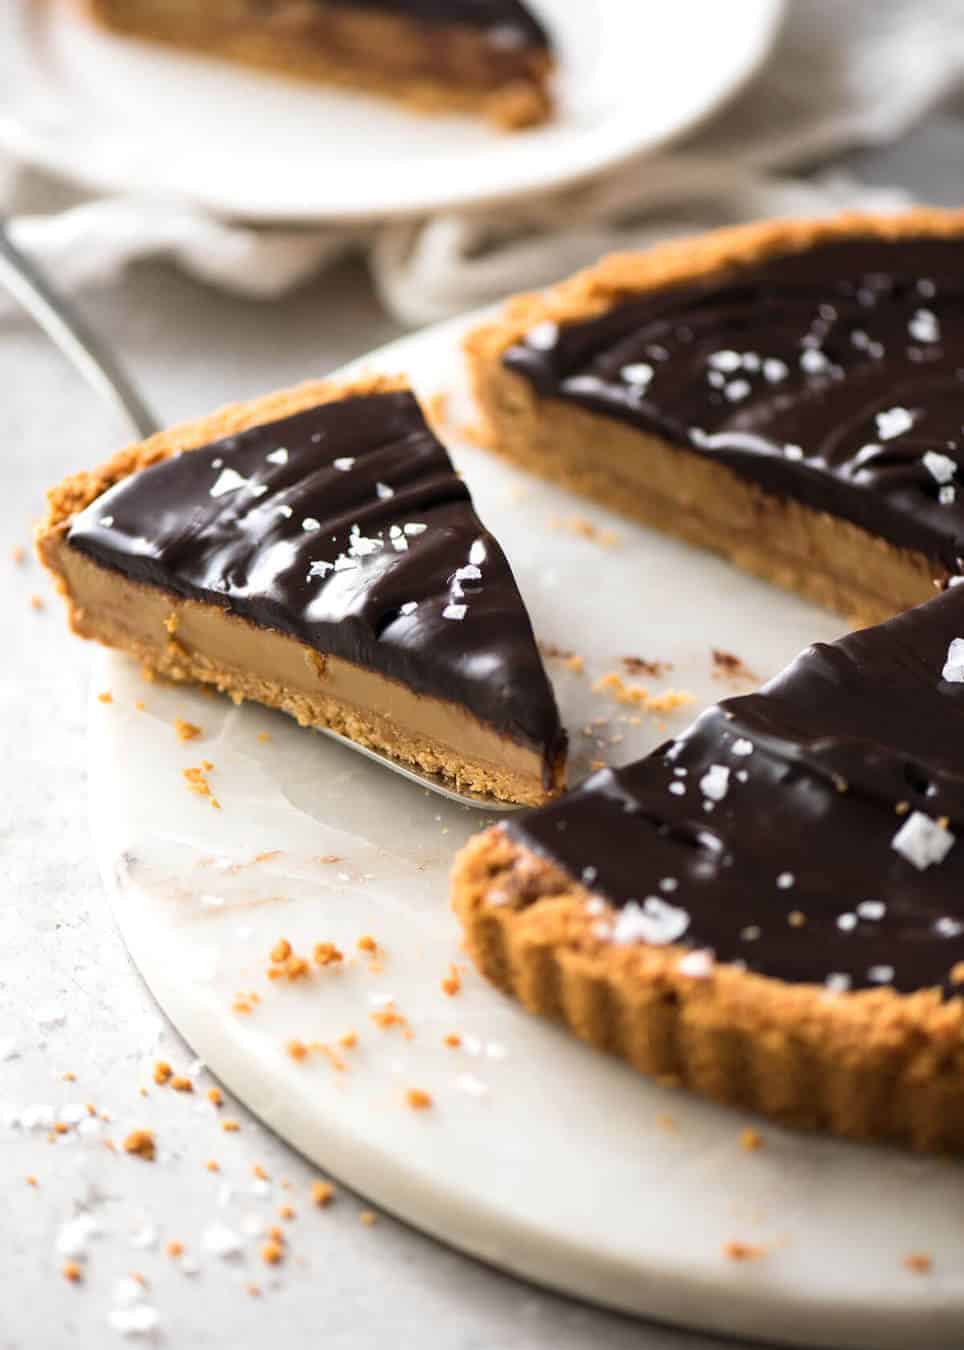 A sinfully decadent Salted Caramel Tart with a creamy soft salted caramel filling topped with luxurious chocolate ganache. Just SIX ingredients! www.recipetineats.com